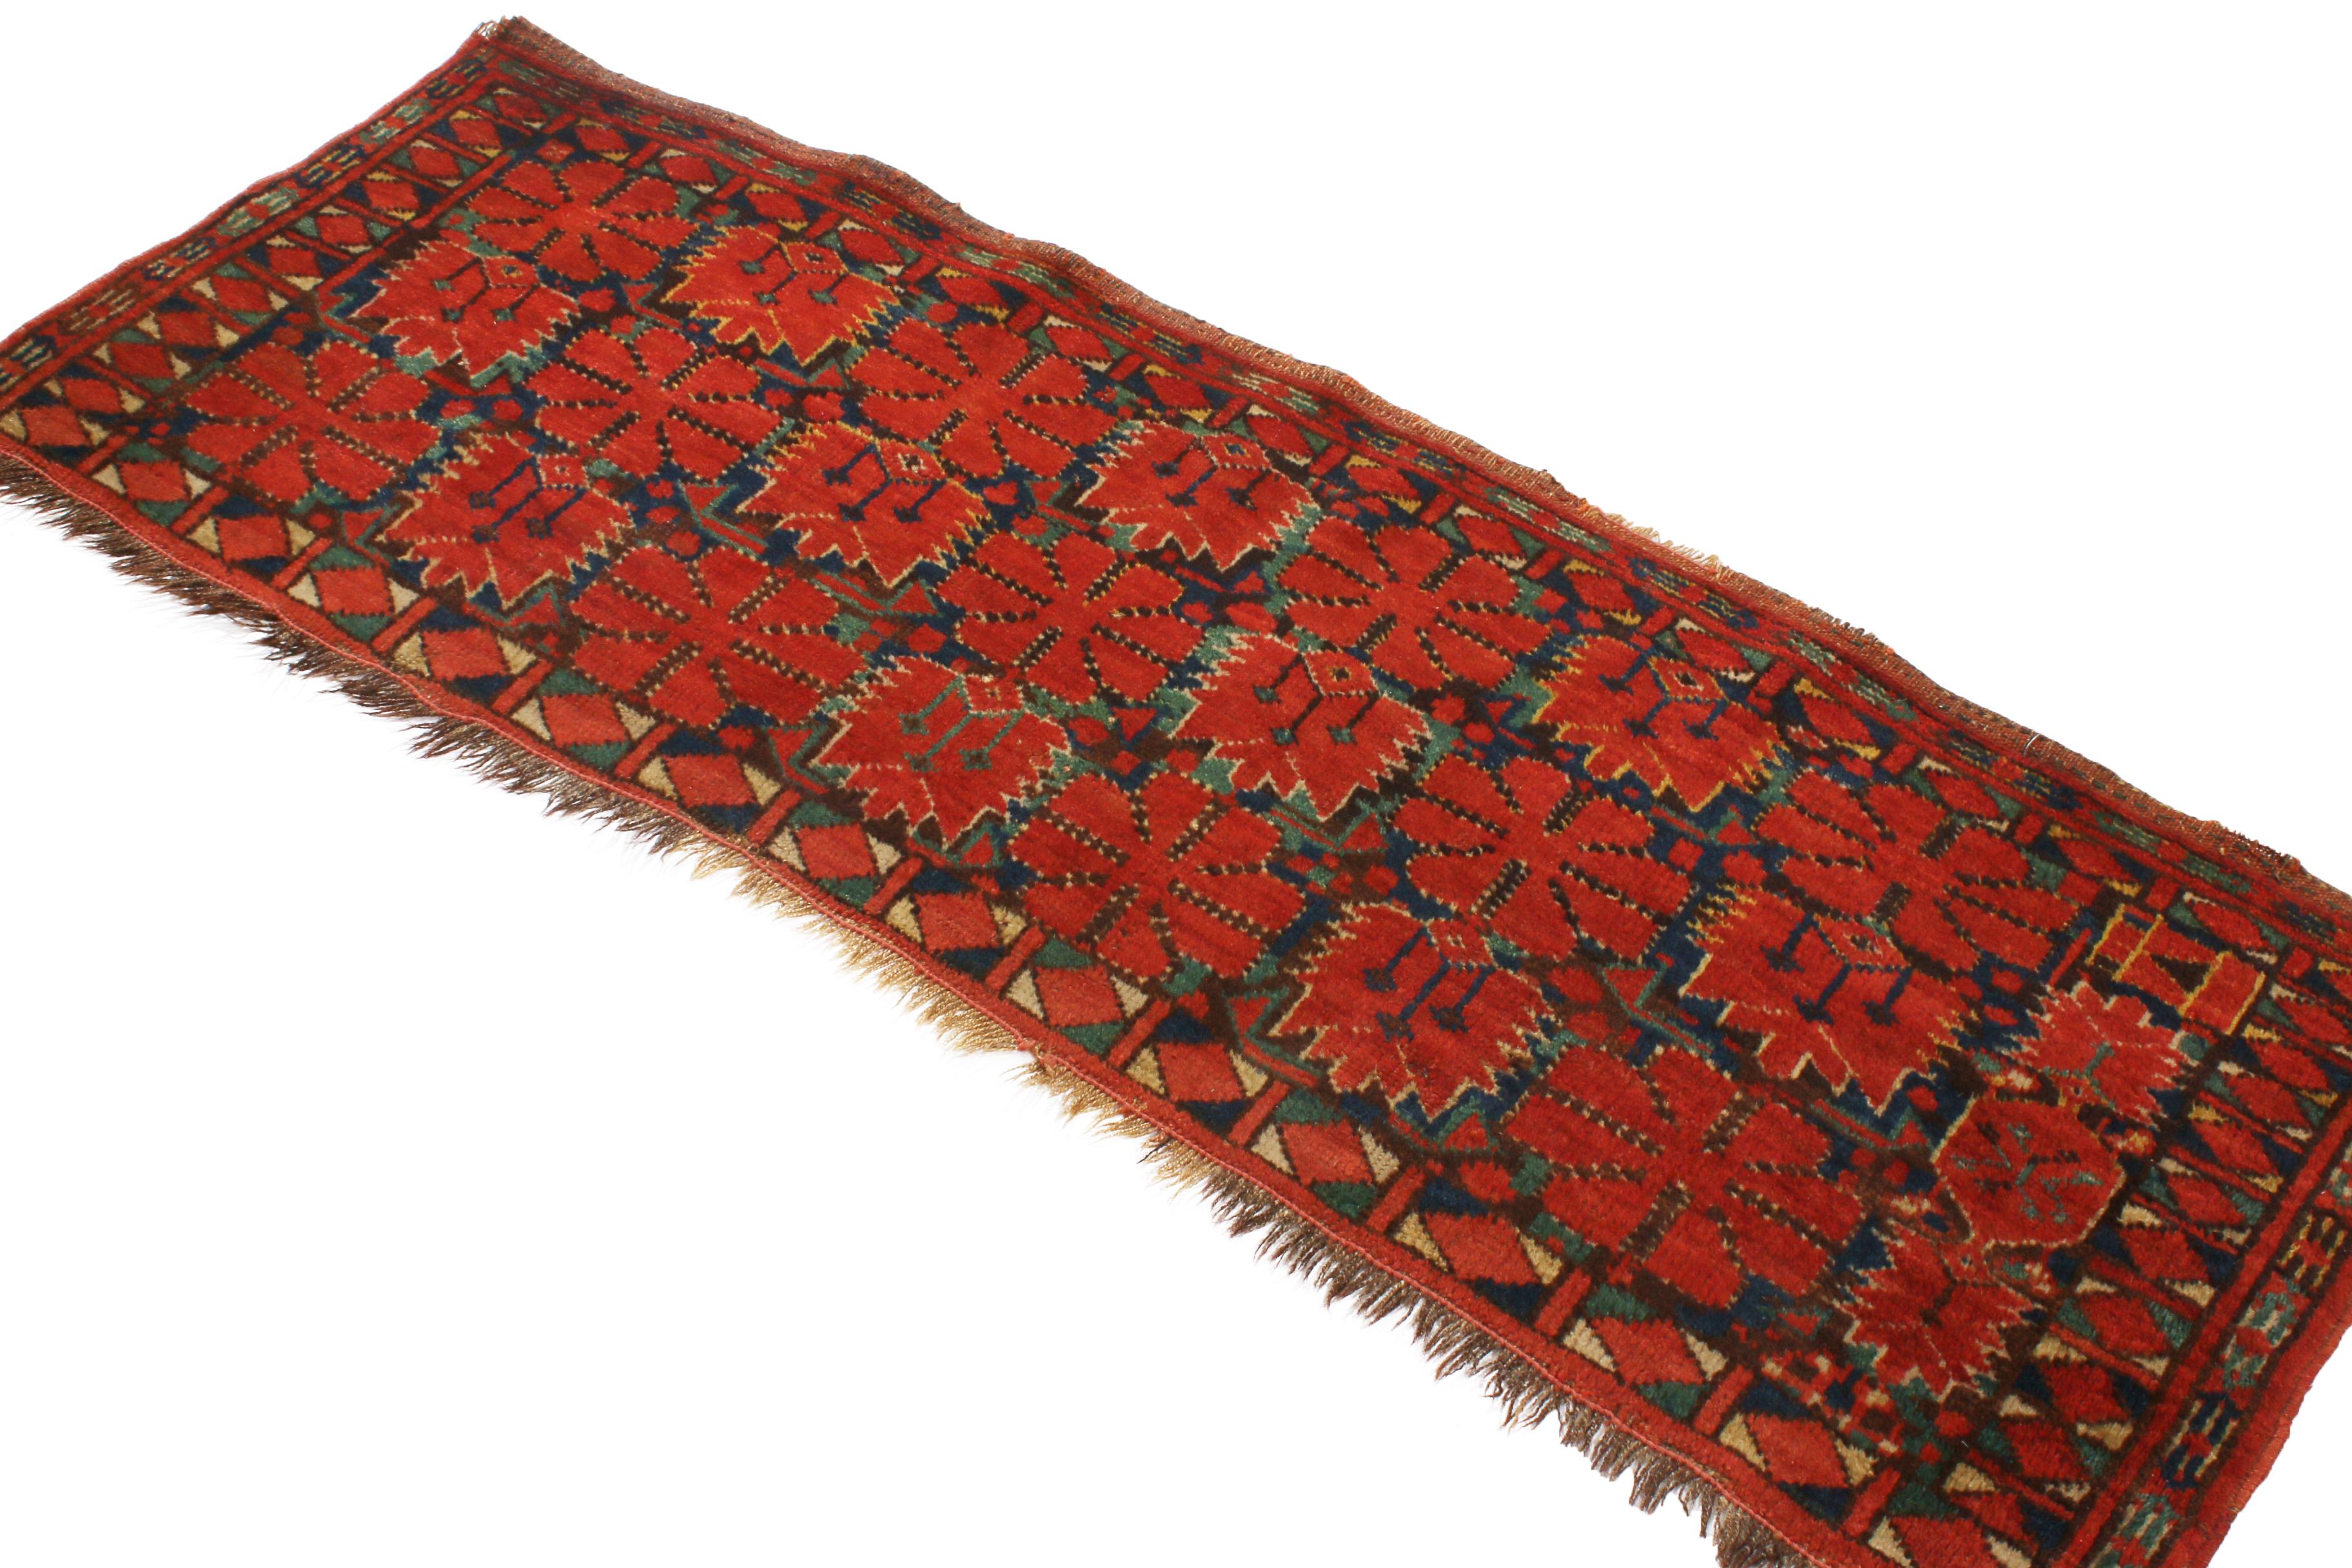 Originating from Russia in 1890, this antique, hand knotted wool Turkeman rug enjoys a distinct combination of gentle and stylistically tribal red floral motifs set against a luminous green background, permeating the field as well as the